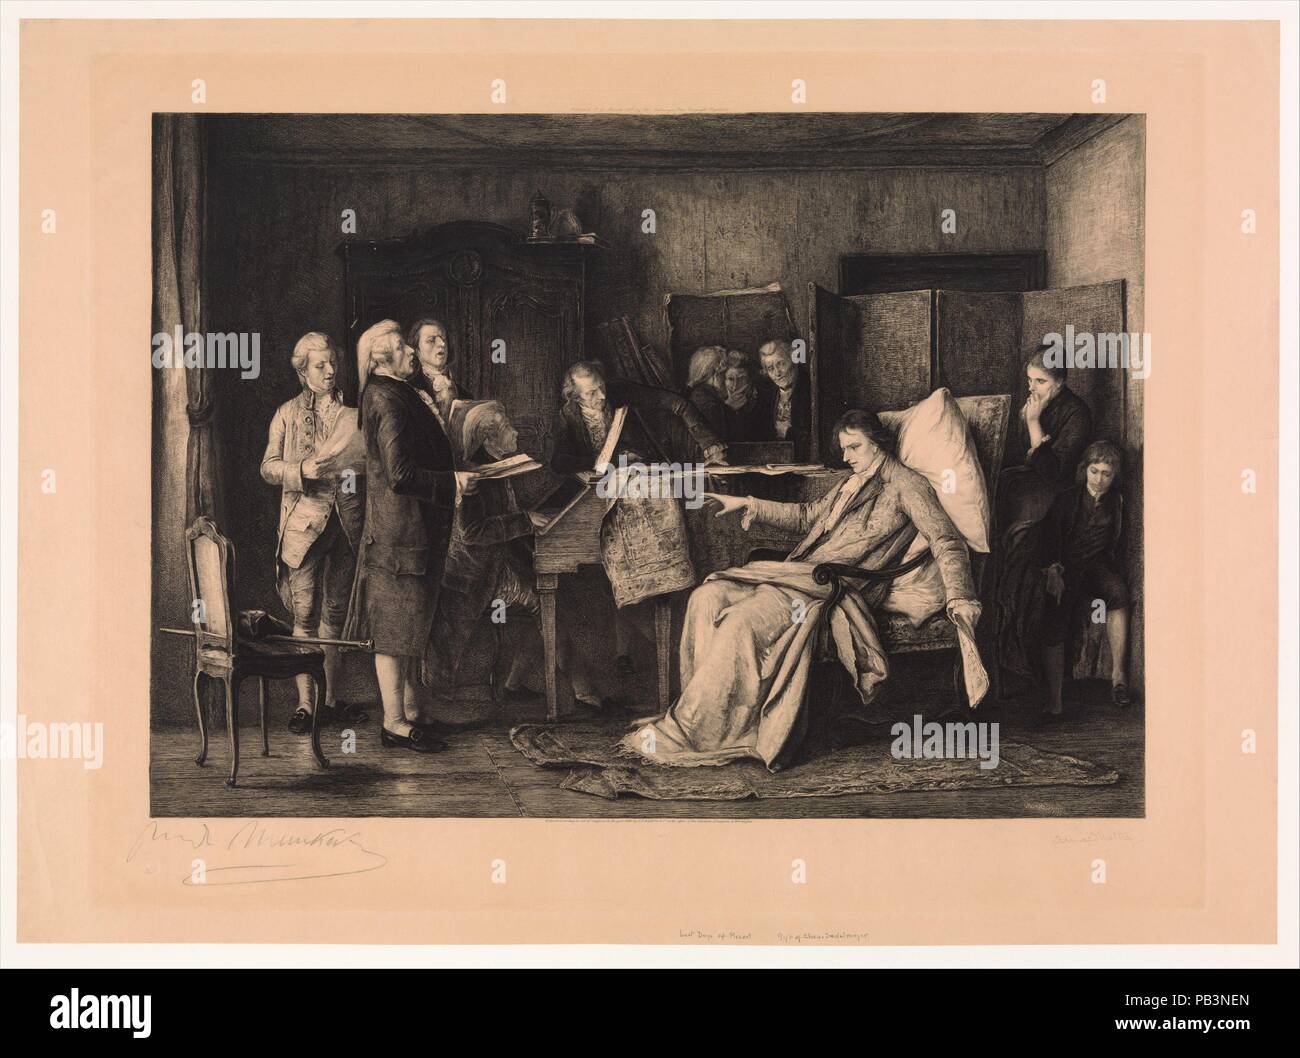 The Last Moments of Mozart. Artist: Armand Mathey-Doret (French, Besançon 1854-1931 Buffard); After Mihály Munkácsy (Hungarian, Mukachevo (Munkács) 1844-1900 Endenich). Dimensions: Plate: 20 1/8 × 26 1/4 in. (51.1 × 66.7 cm)  Sheet: 21 5/8 x 29 5/8 in. (54.9 x 75.2 cm). Publisher: Published by Charles Sedelmeyer (French). Date: 1888. Museum: Metropolitan Museum of Art, New York, USA. Stock Photo